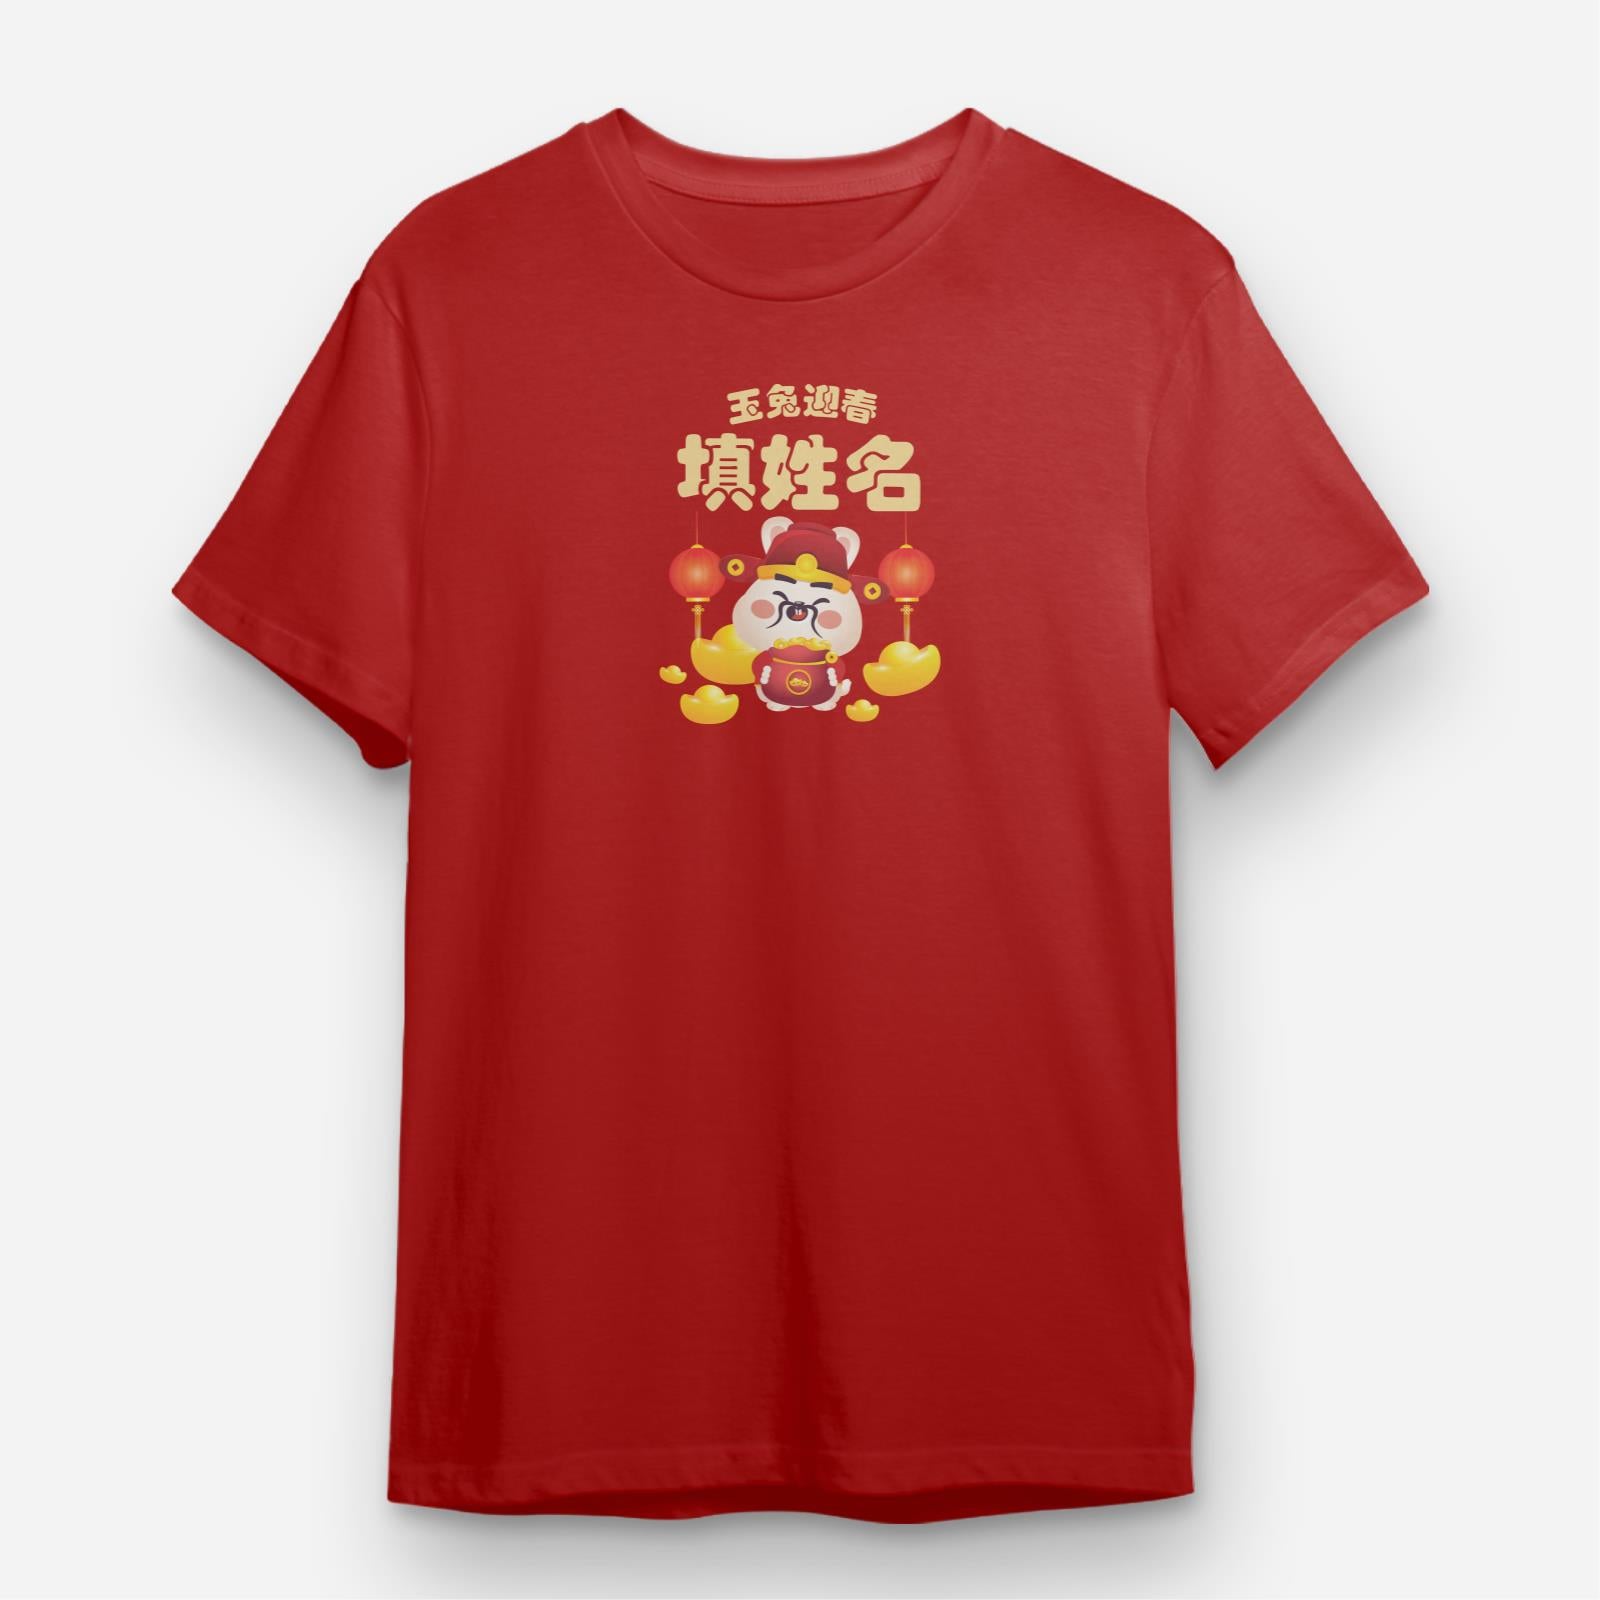 Cny Rabbit Family - Daddy Rabbit Unisex Tee Shirt with Chinese Personalization